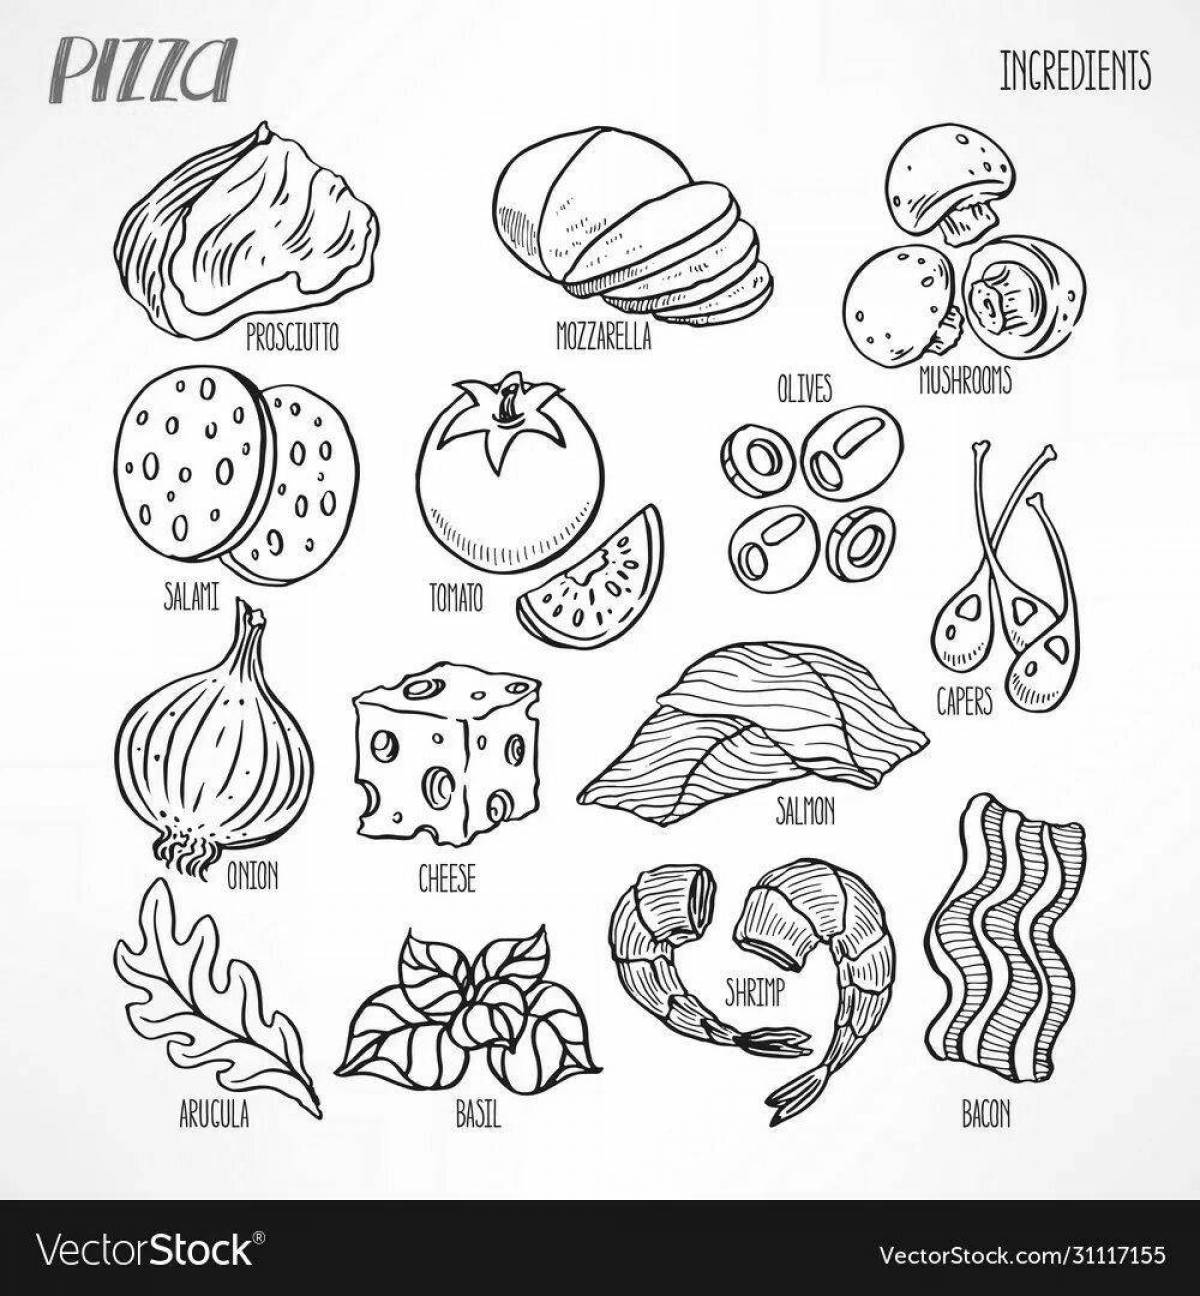 Tempting pizza ingredients coloring book